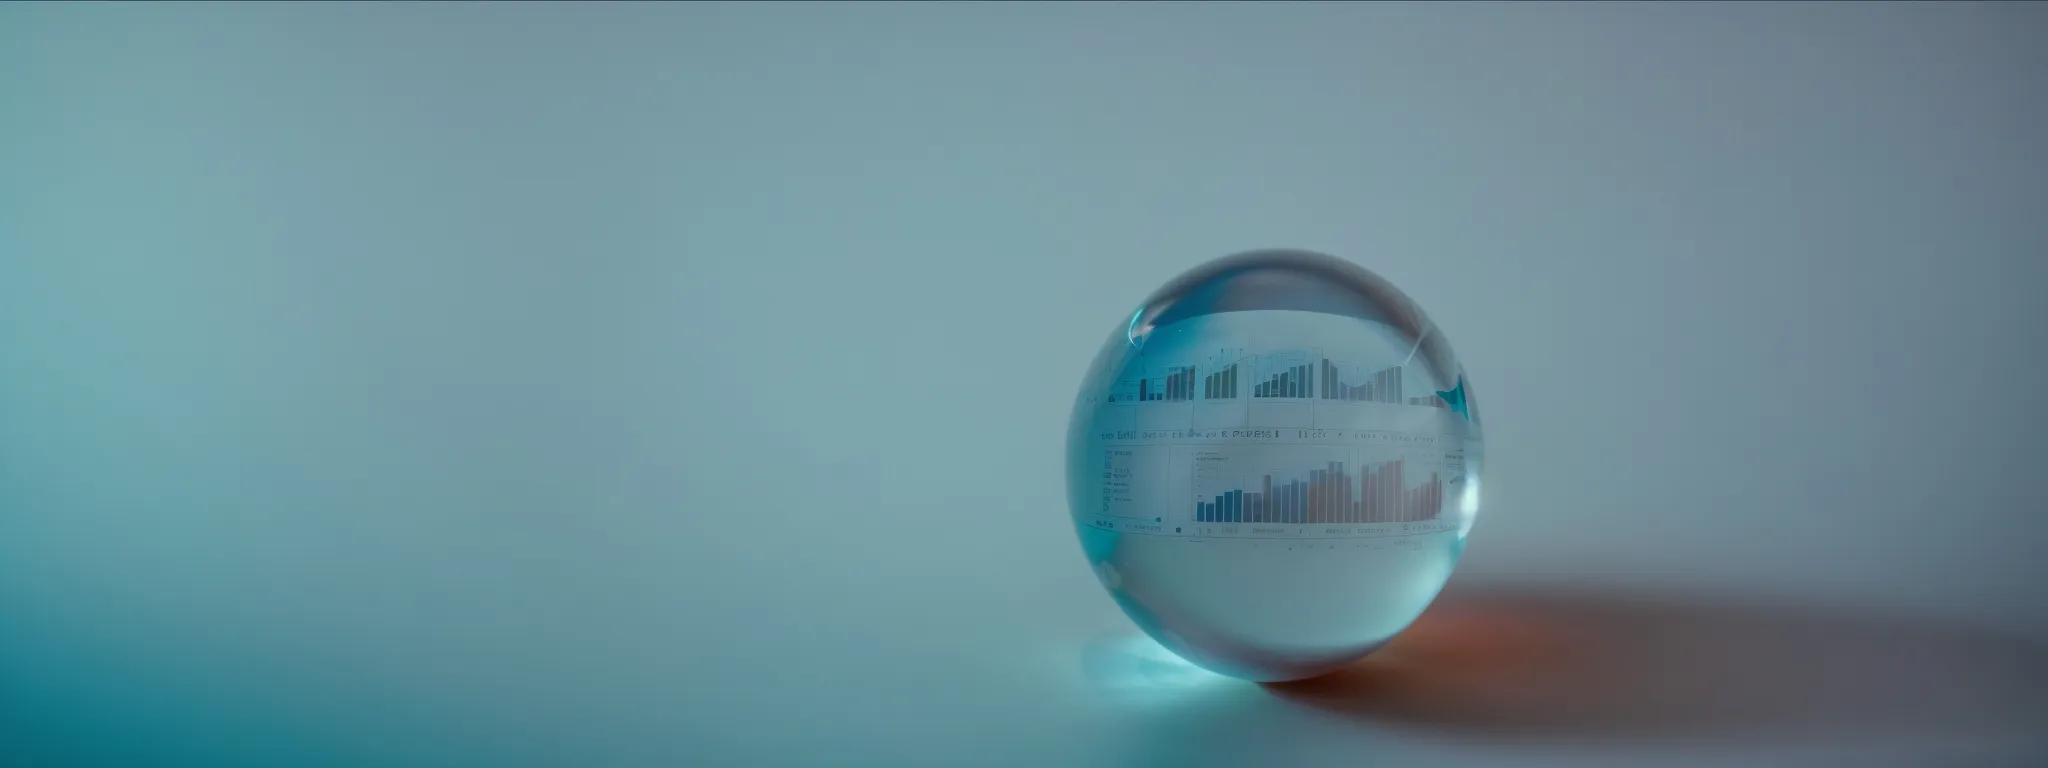 a crystal ball resting on a reflective surface amid financial charts and graphs, symbolizing forecasting in ppc bid management.